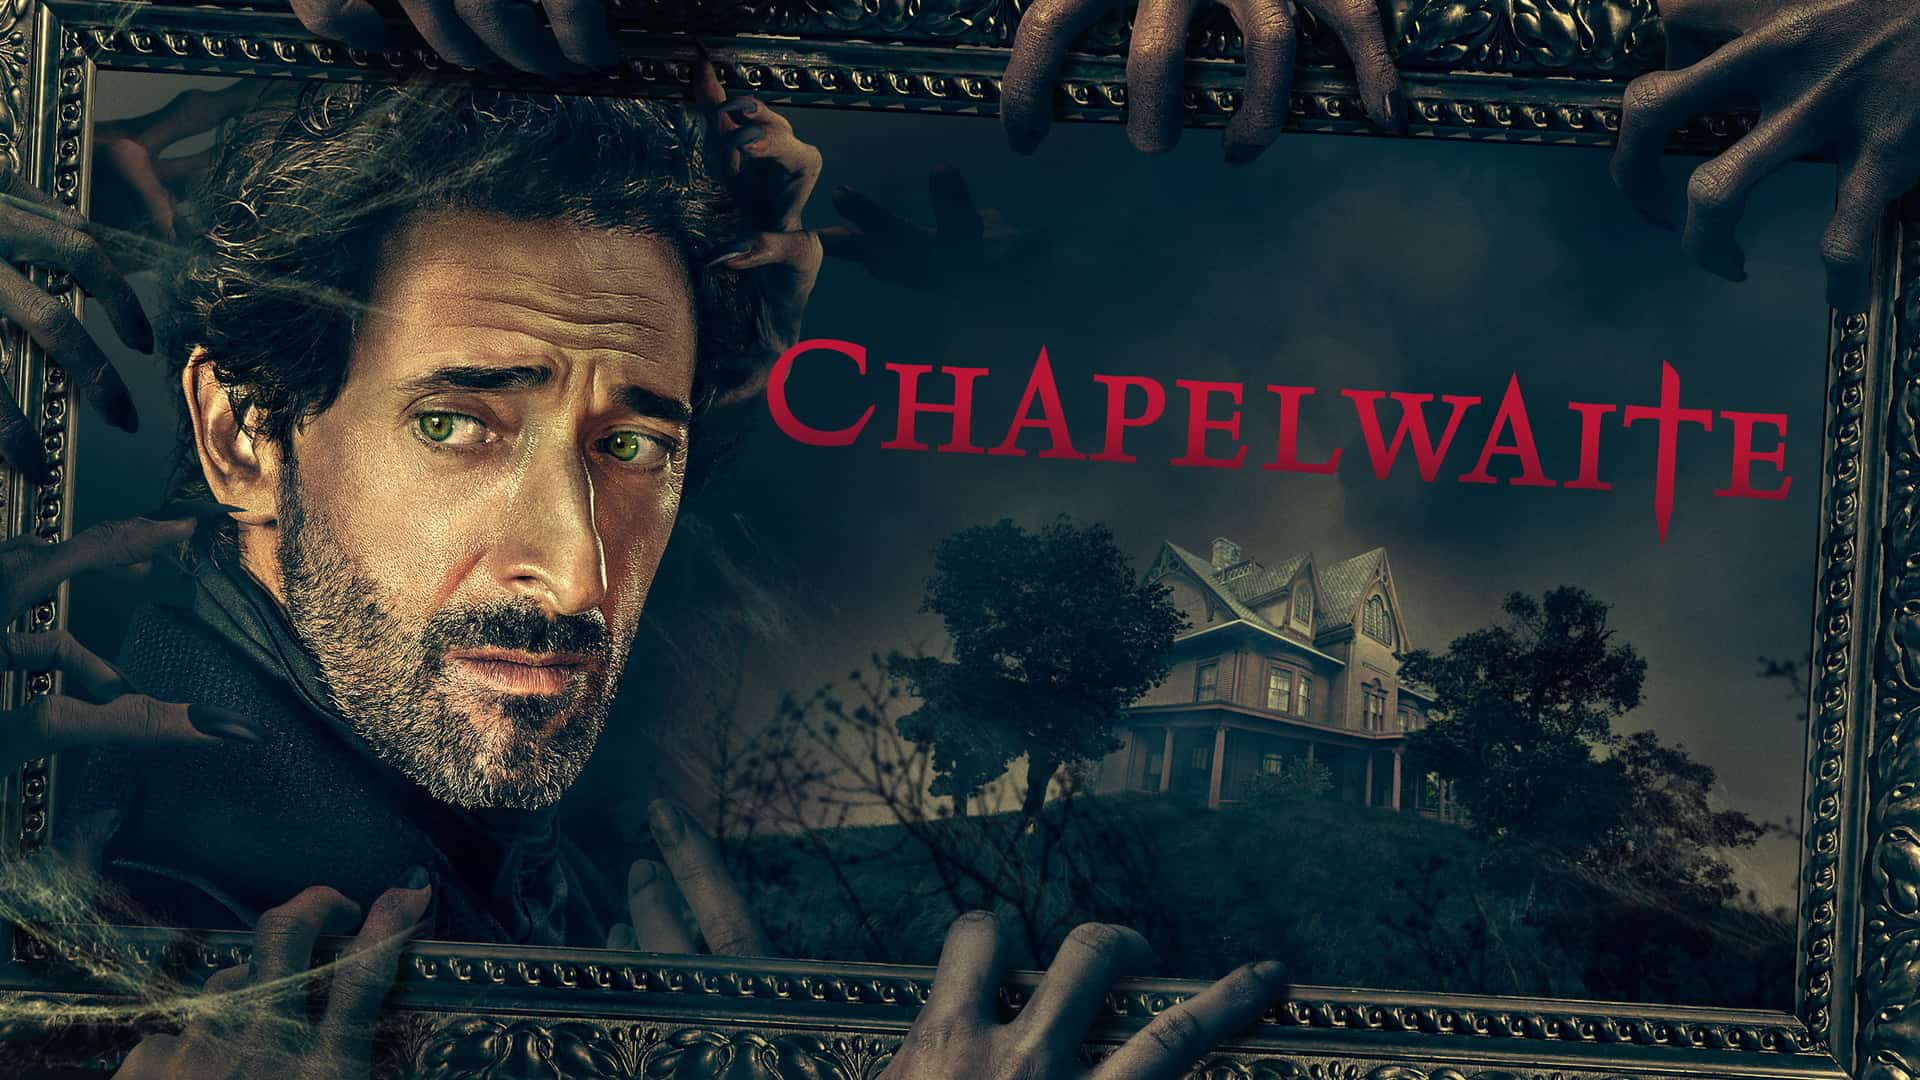 All About the Cast of “Chapelwaite”